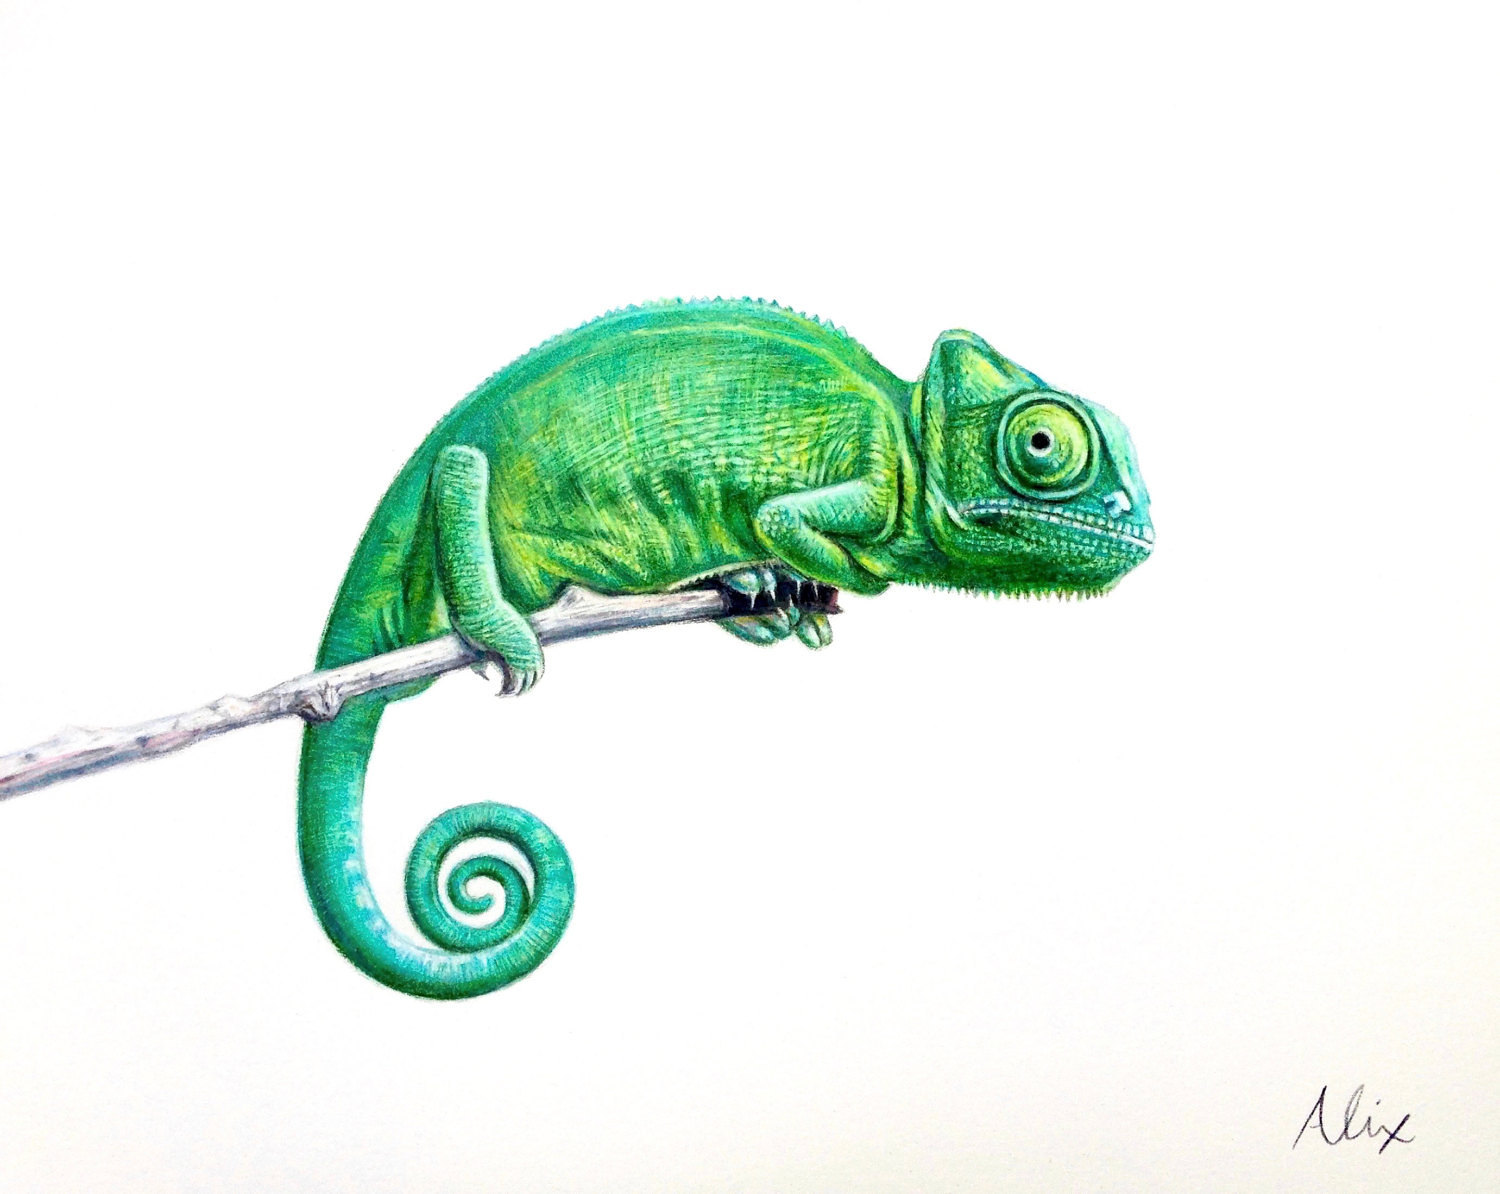  How To Draw A Chameleon of all time The ultimate guide 